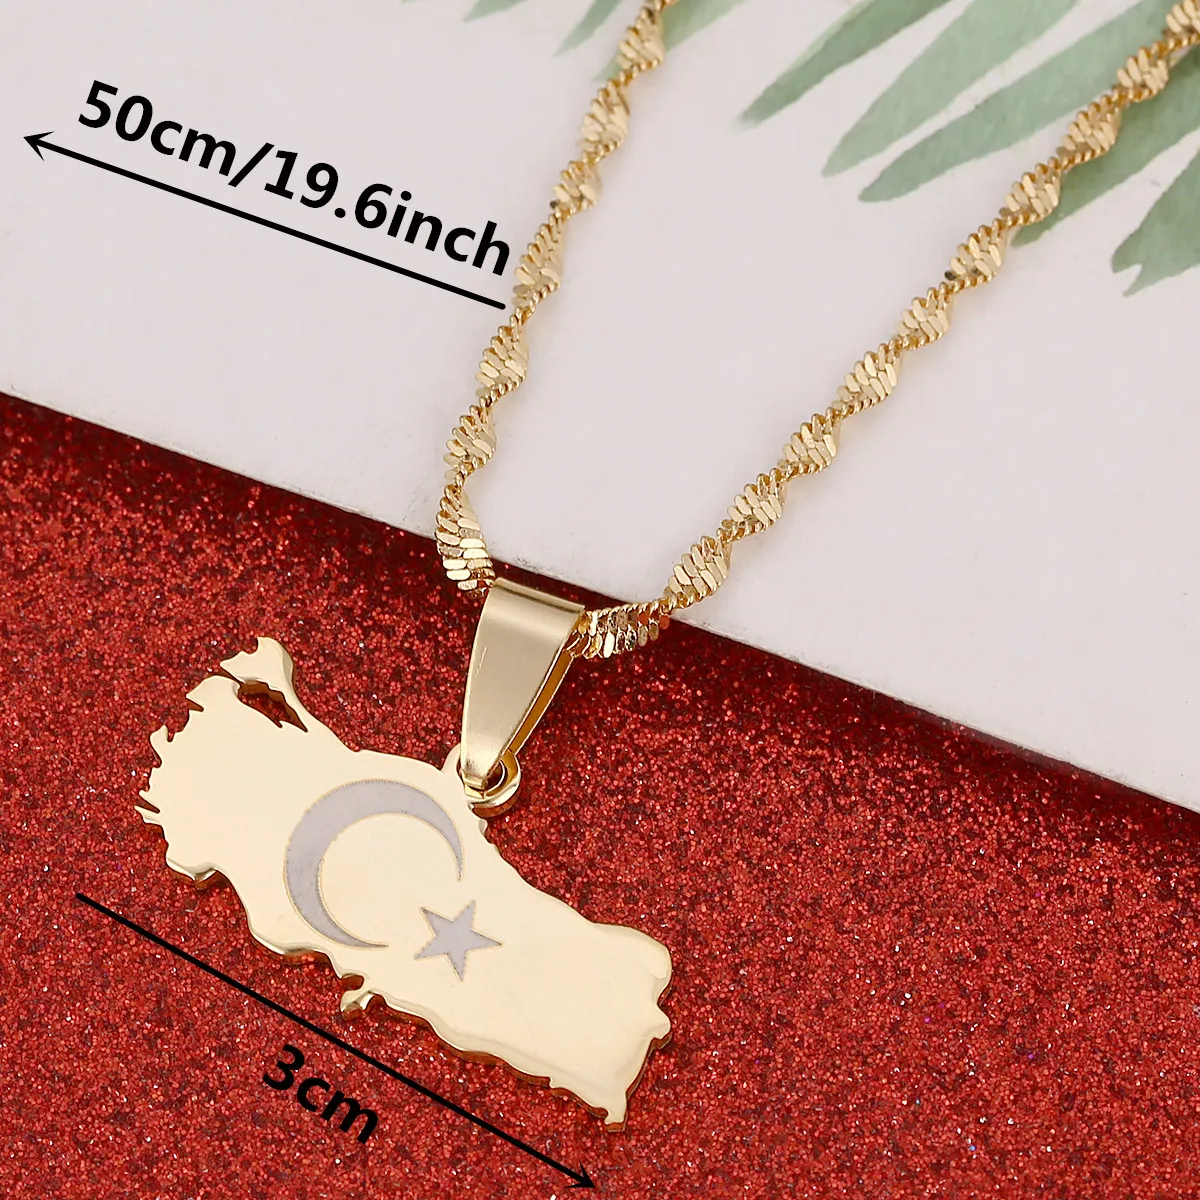 Turkey Map Flag Gold Plated Turkish Pendant Necklace For Women Men Turks Jewelry Patriotic Gifts336A